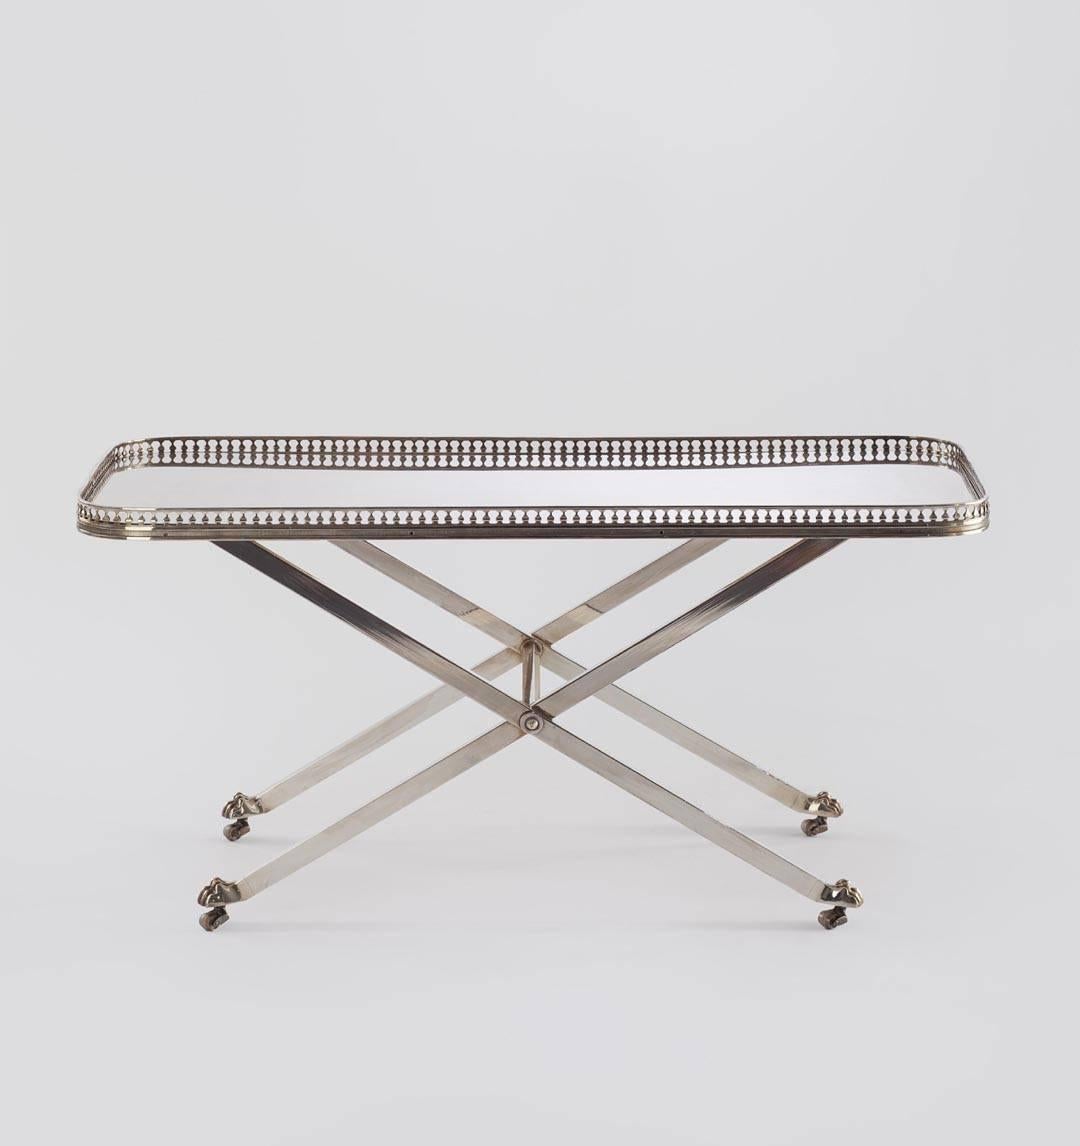 Silver tea table by Maria Pergay with balcony edge, X legs and tiger feet.